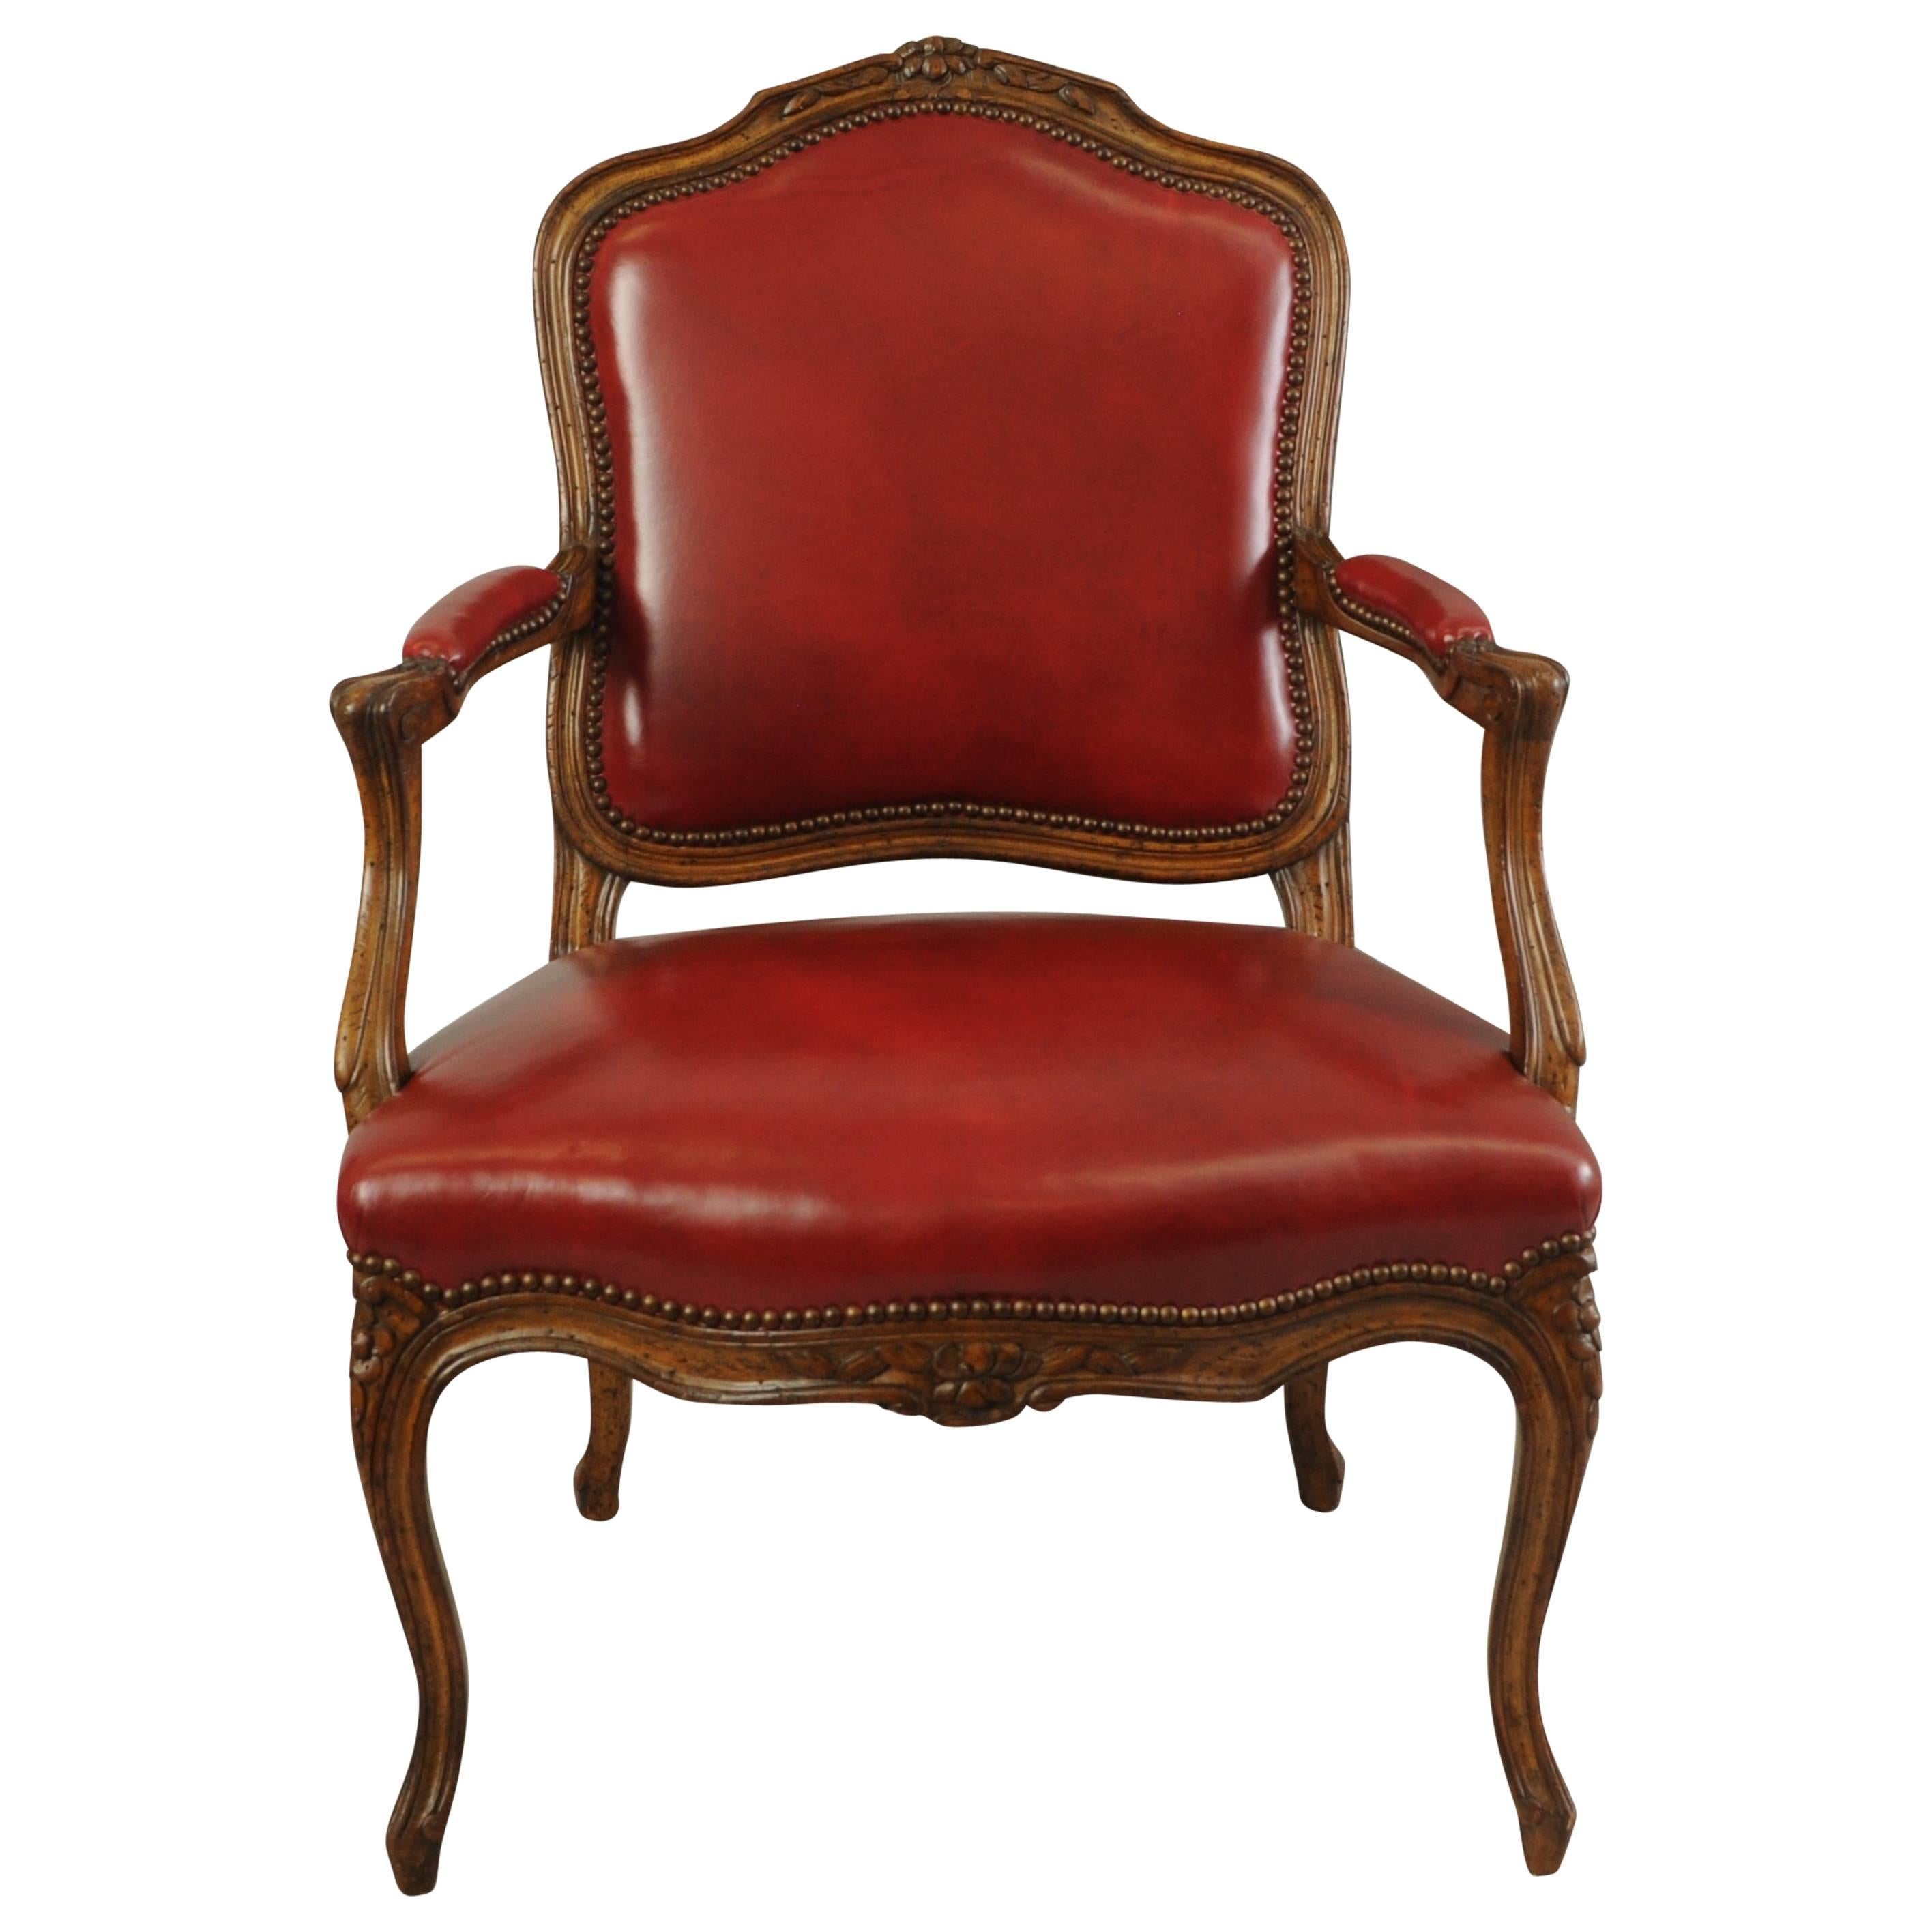 Vintage Auffray & Co French Country Louis XV Style Armchair Walnut & Red Leather